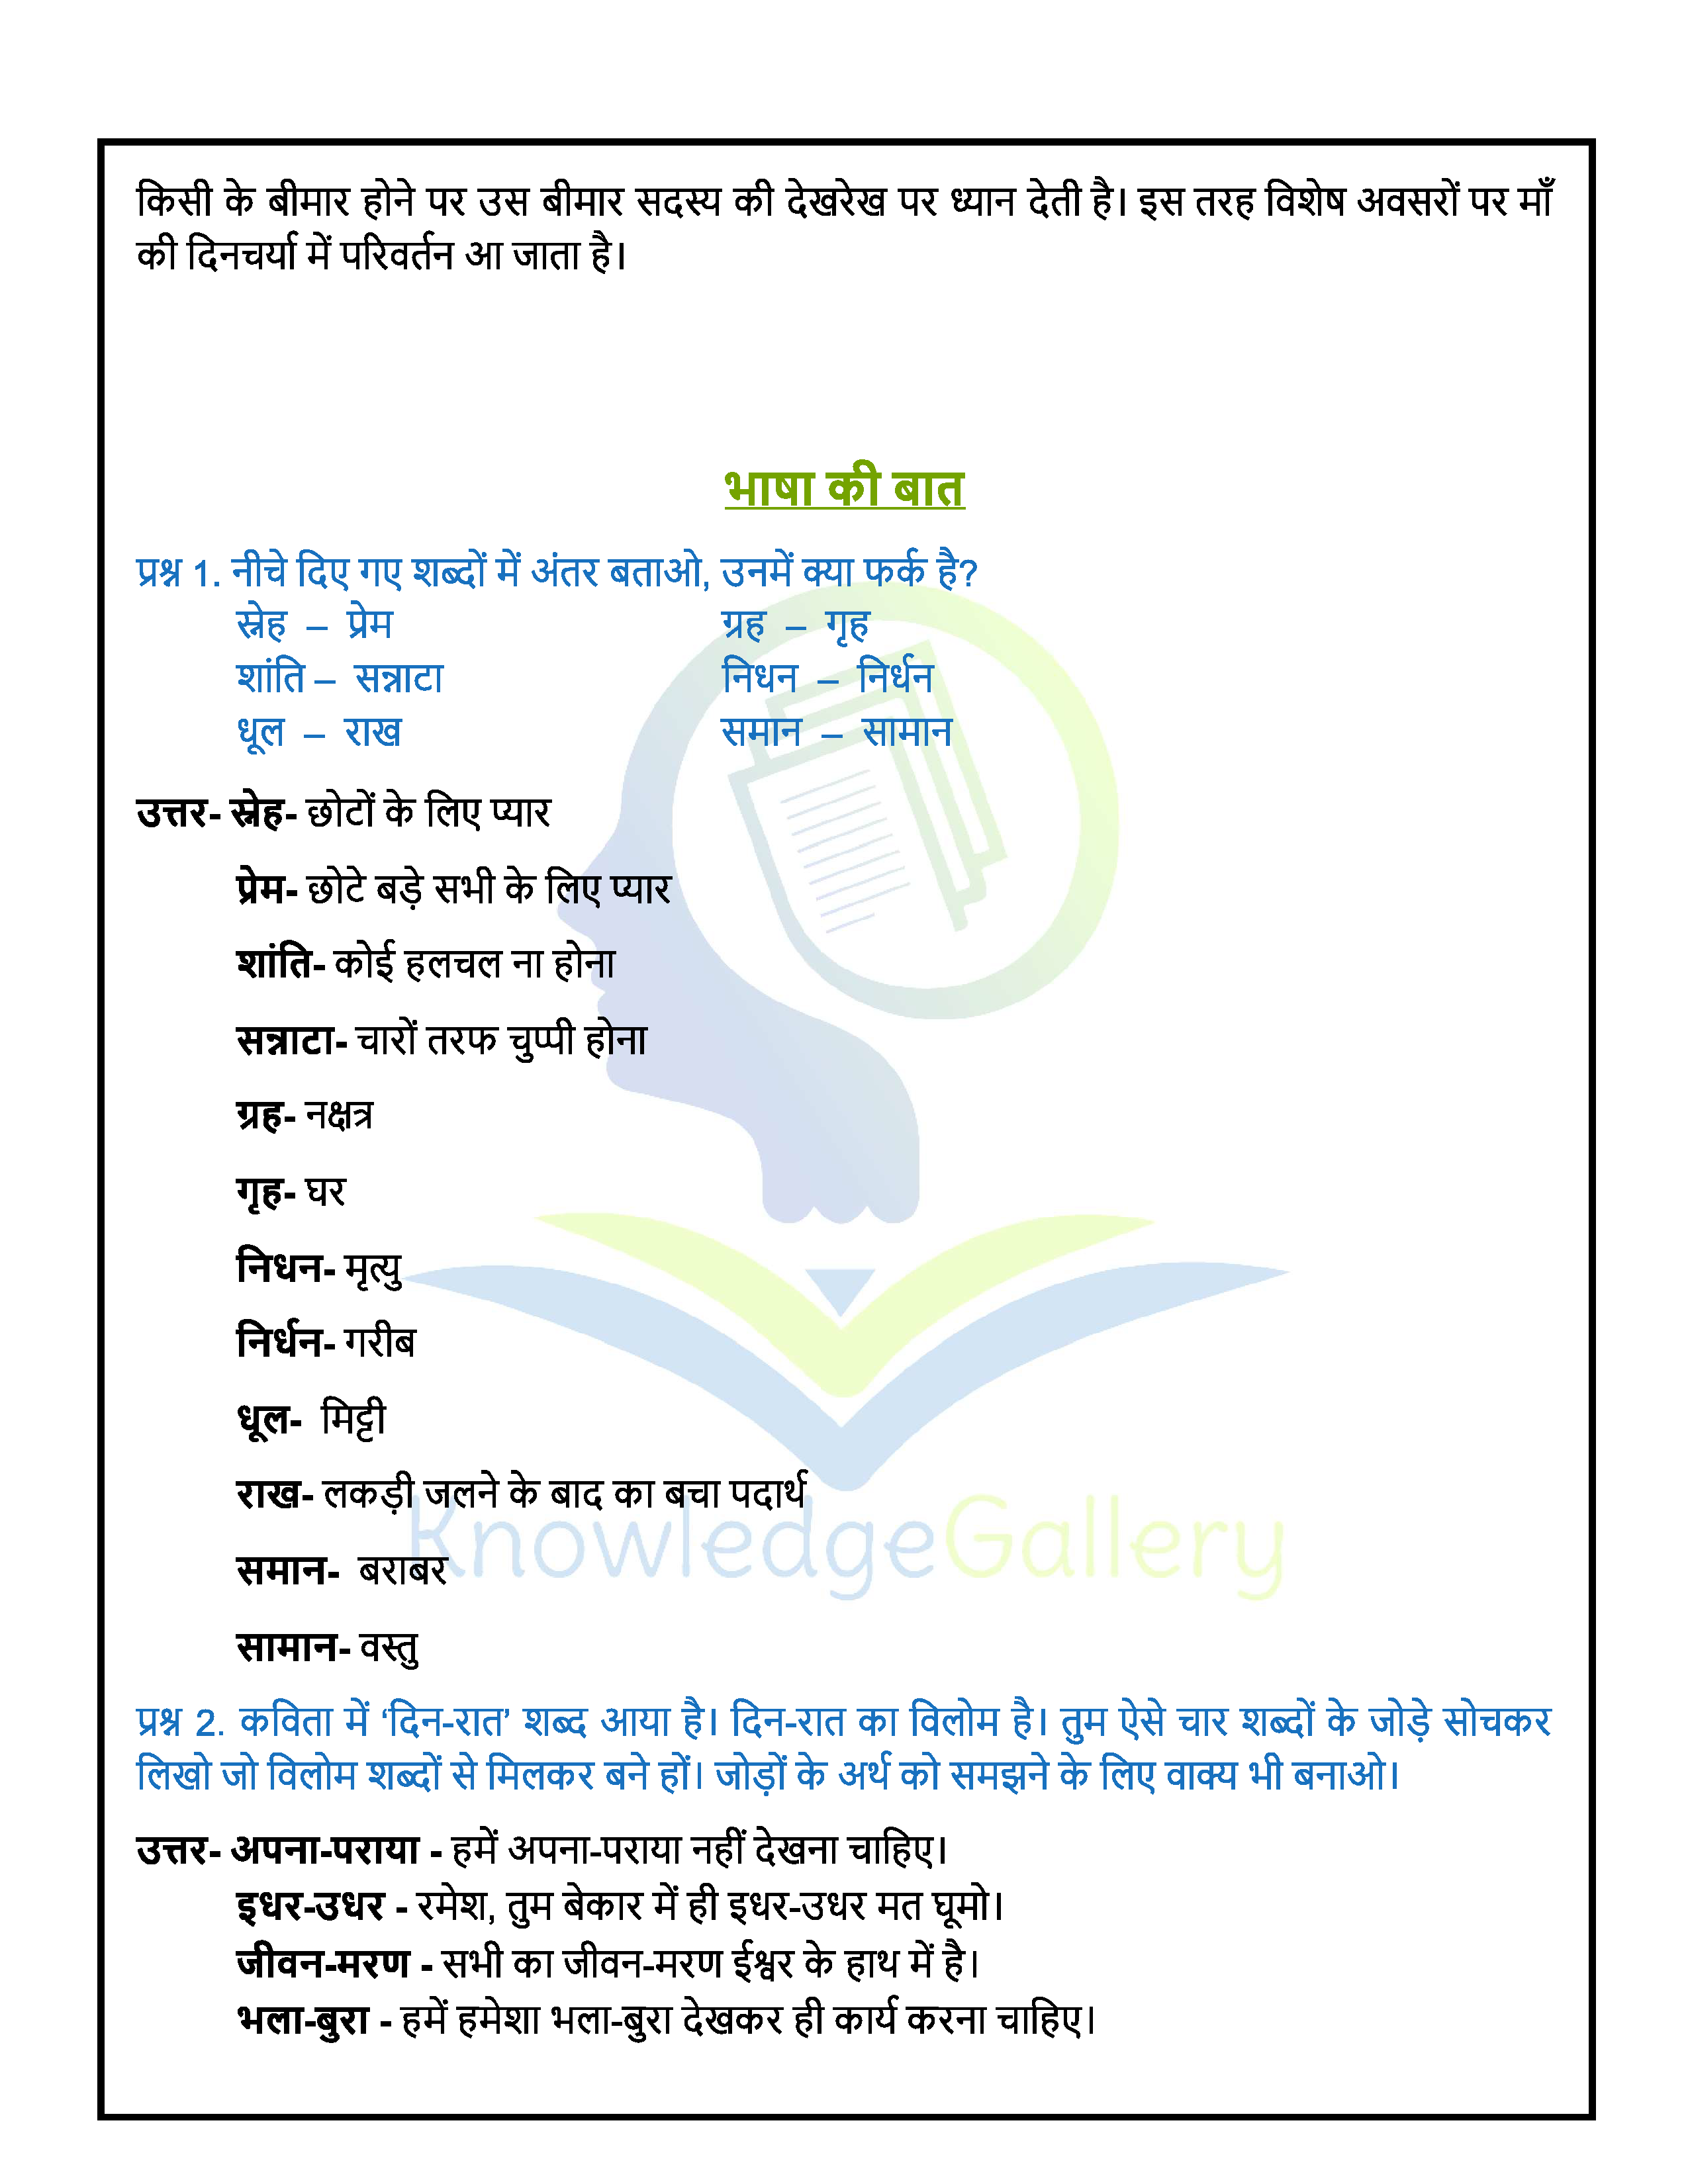 NCERT Solution For Class 6 Hindi Chapter 13 part 5